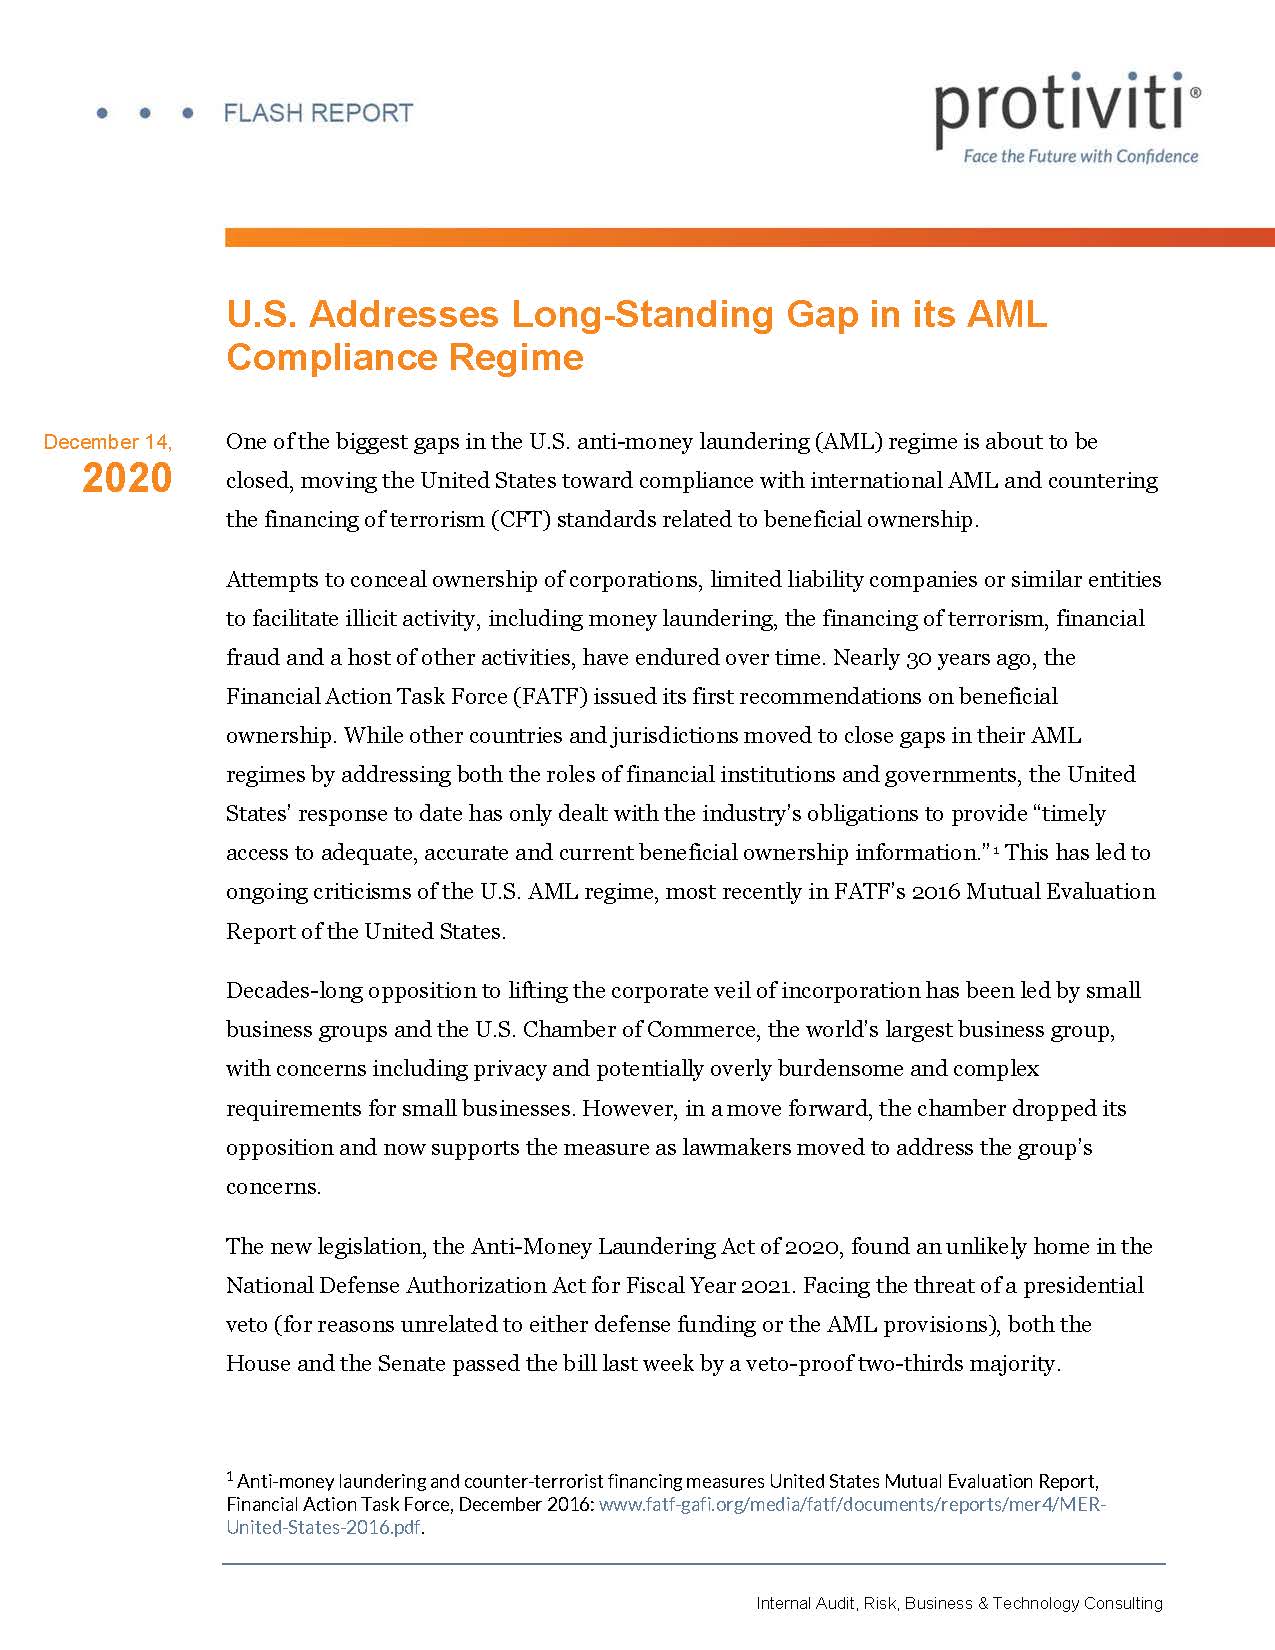 Screenshot of the first page of U.S. Addresses Long-Standing Gap in its AML Compliance Regime